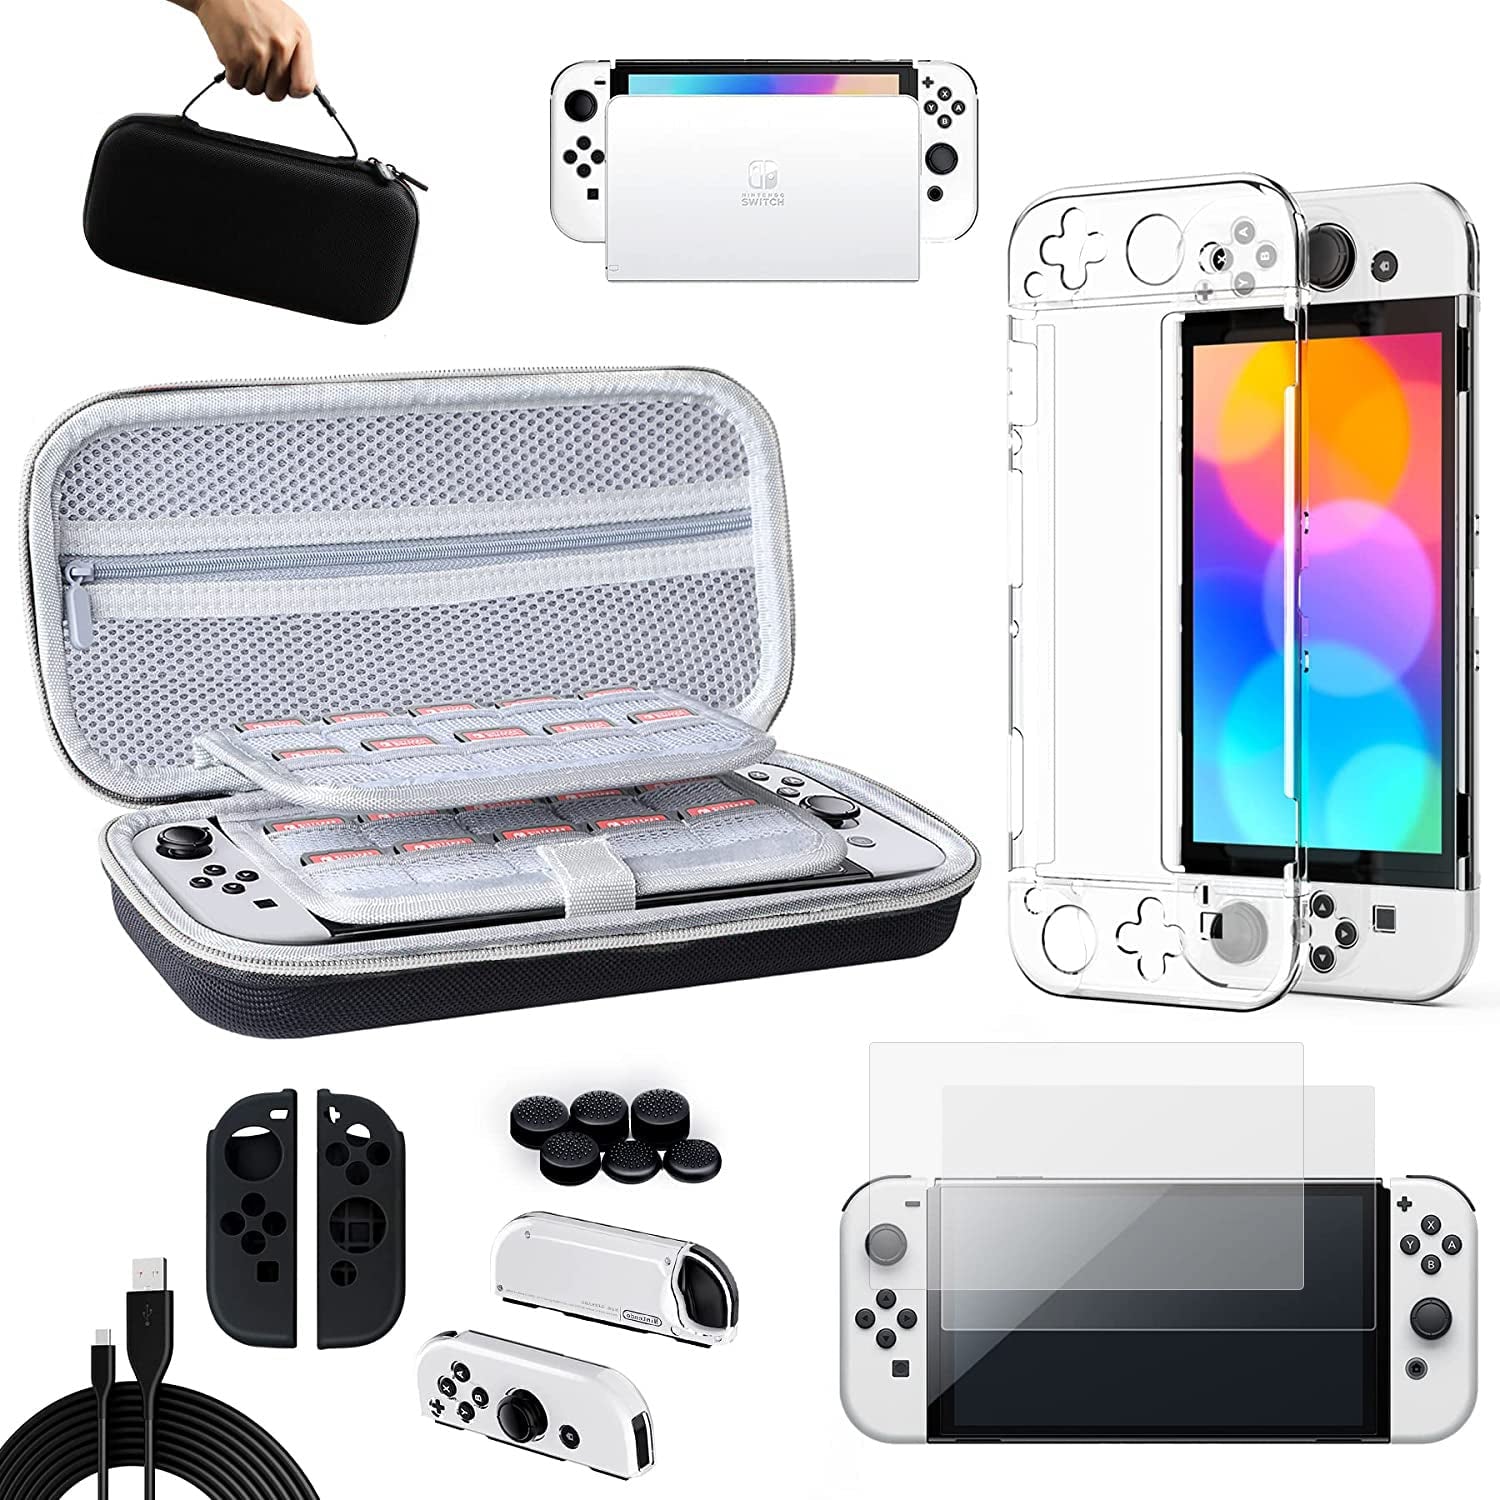 14-in-1 Accessories Kit for Nintendo Switch OLED Model 202, Includes Case, Clear Cover, Screen Protector, Silicone Joy-Con Skin, Thumb Grip Caps, USB Cable and More